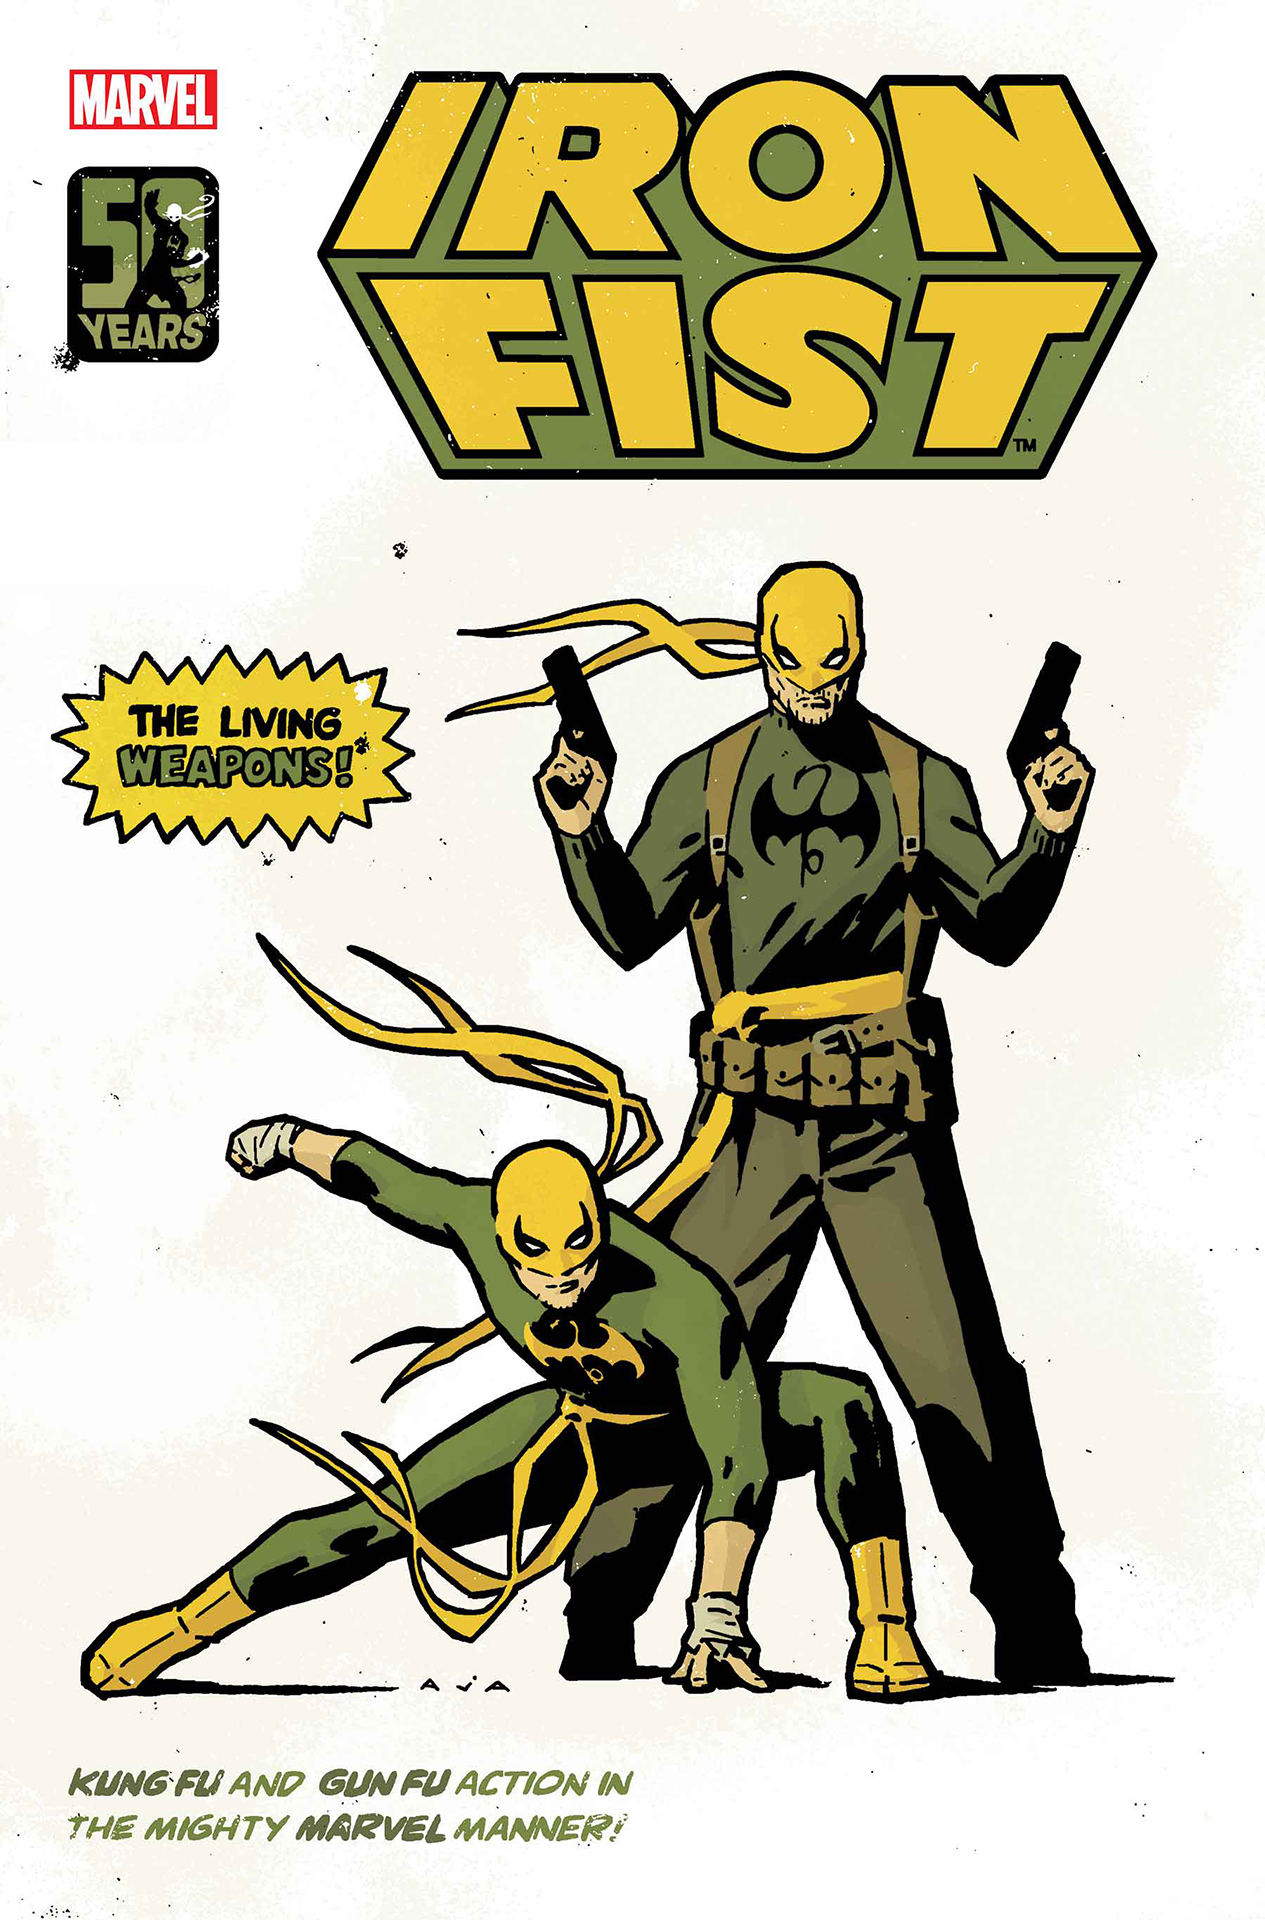 Iron Fist 50th Anniversary Special #1 cover art by David Aja